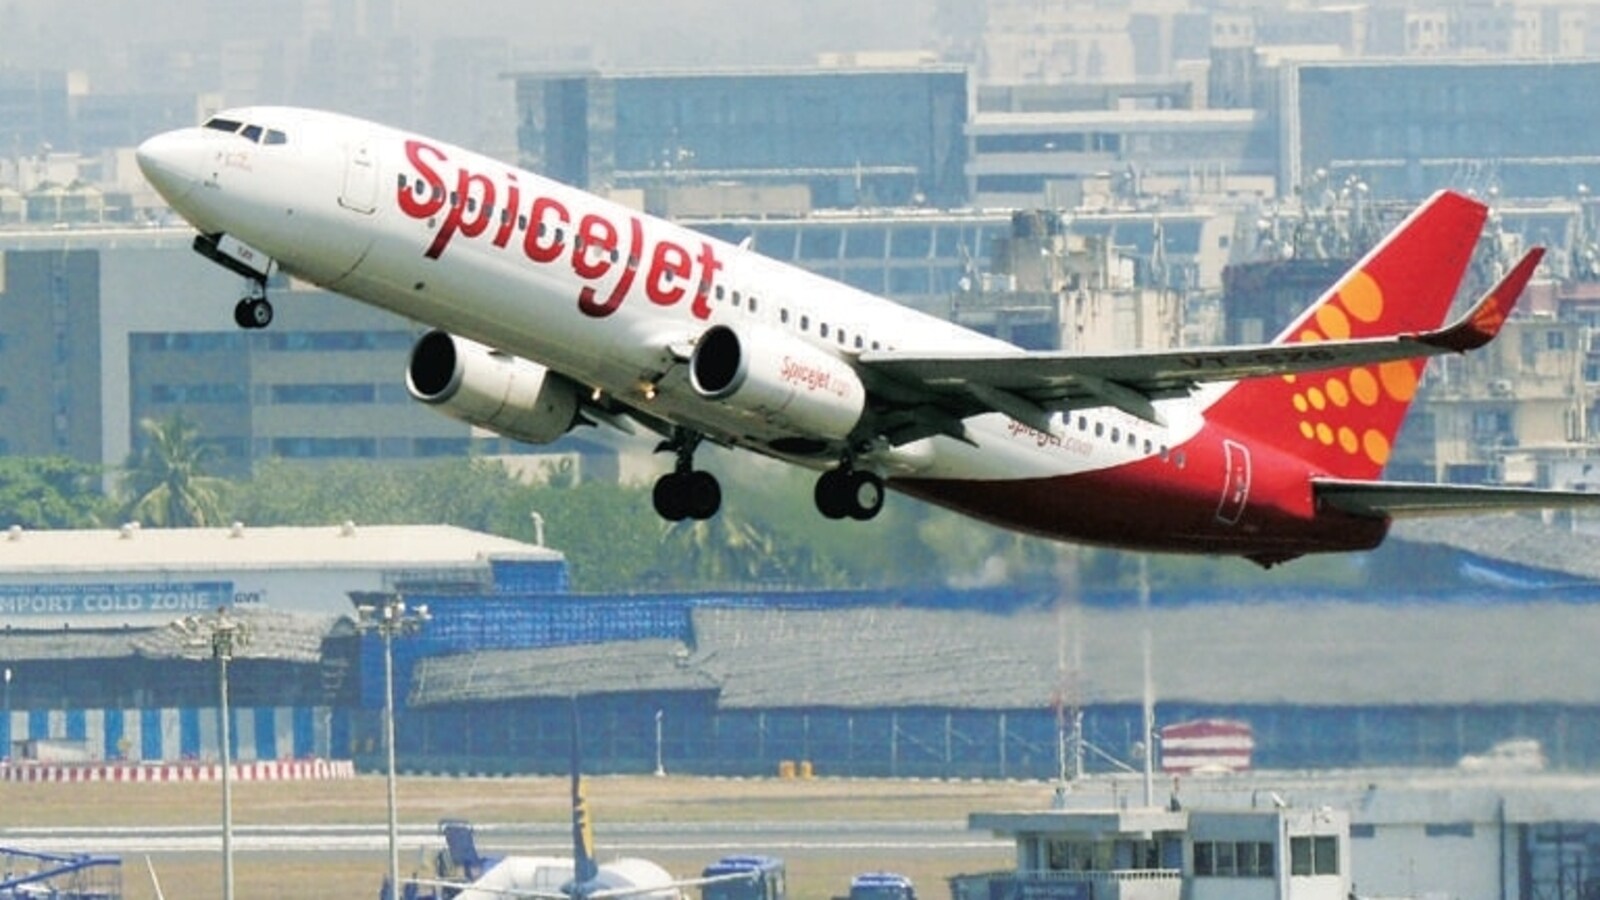 SpiceJet turbulence: DGCA says 2 passengers in ICU, crew off-rostered till  probe | Latest News India - Hindustan Times